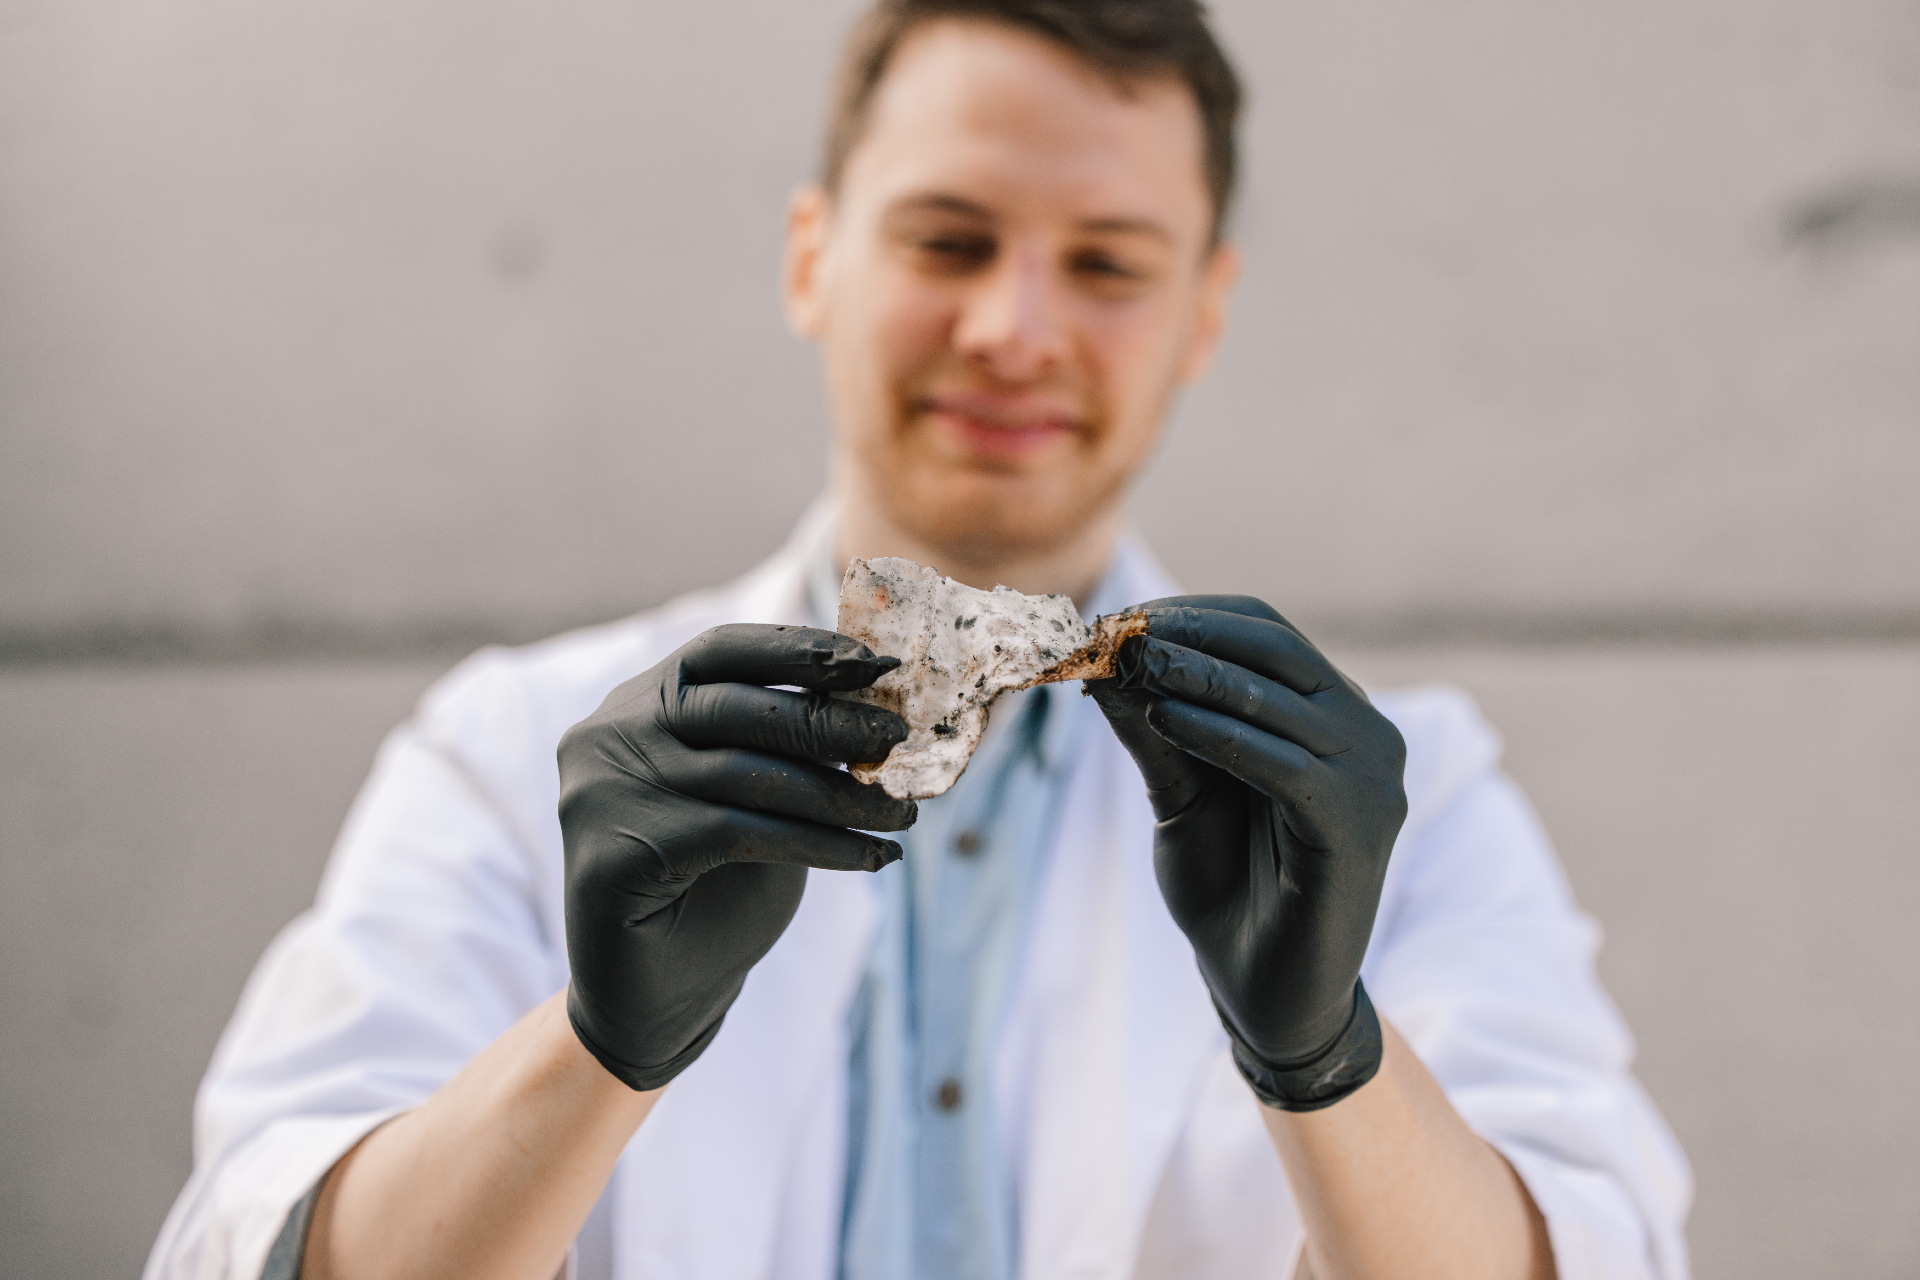 Scientist holds takeout container that is decomposing